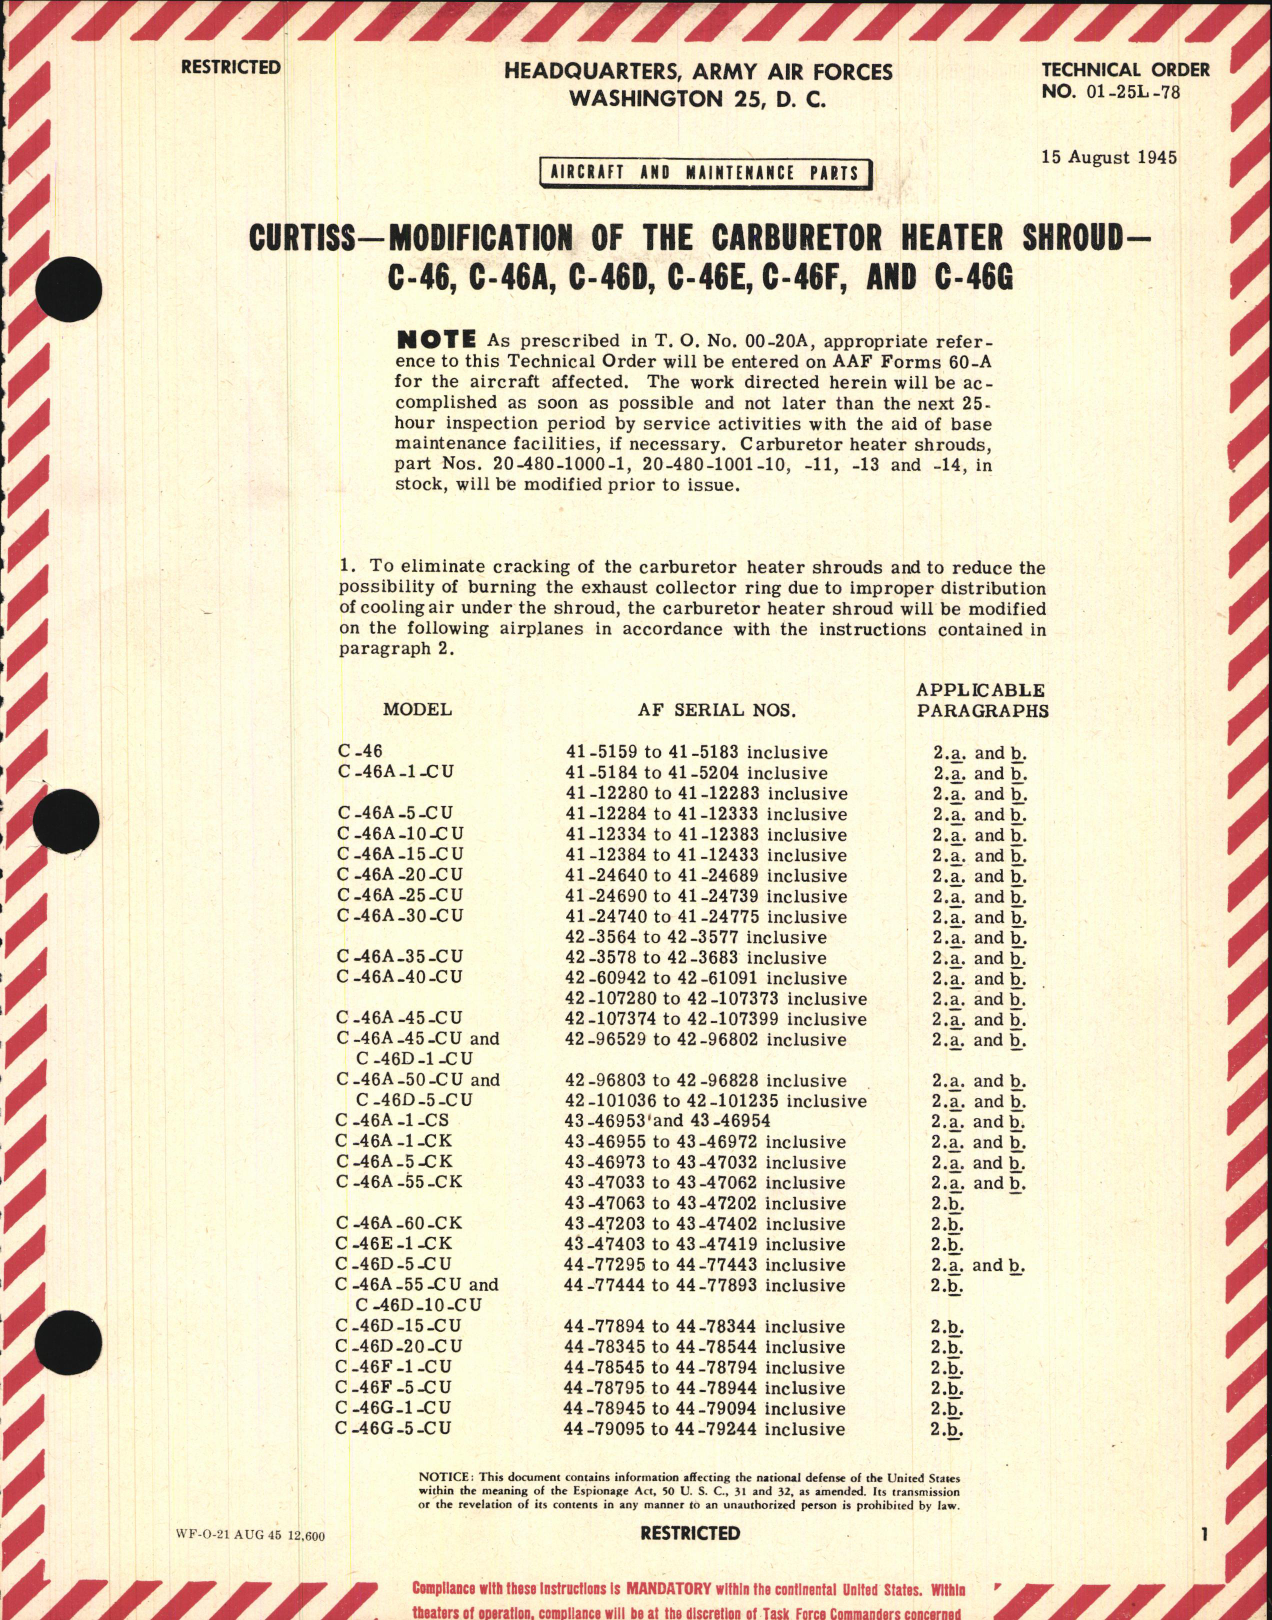 Sample page 1 from AirCorps Library document: Modification of the Carburetor Heater Shroud for C-46, A, D, E, F, and G